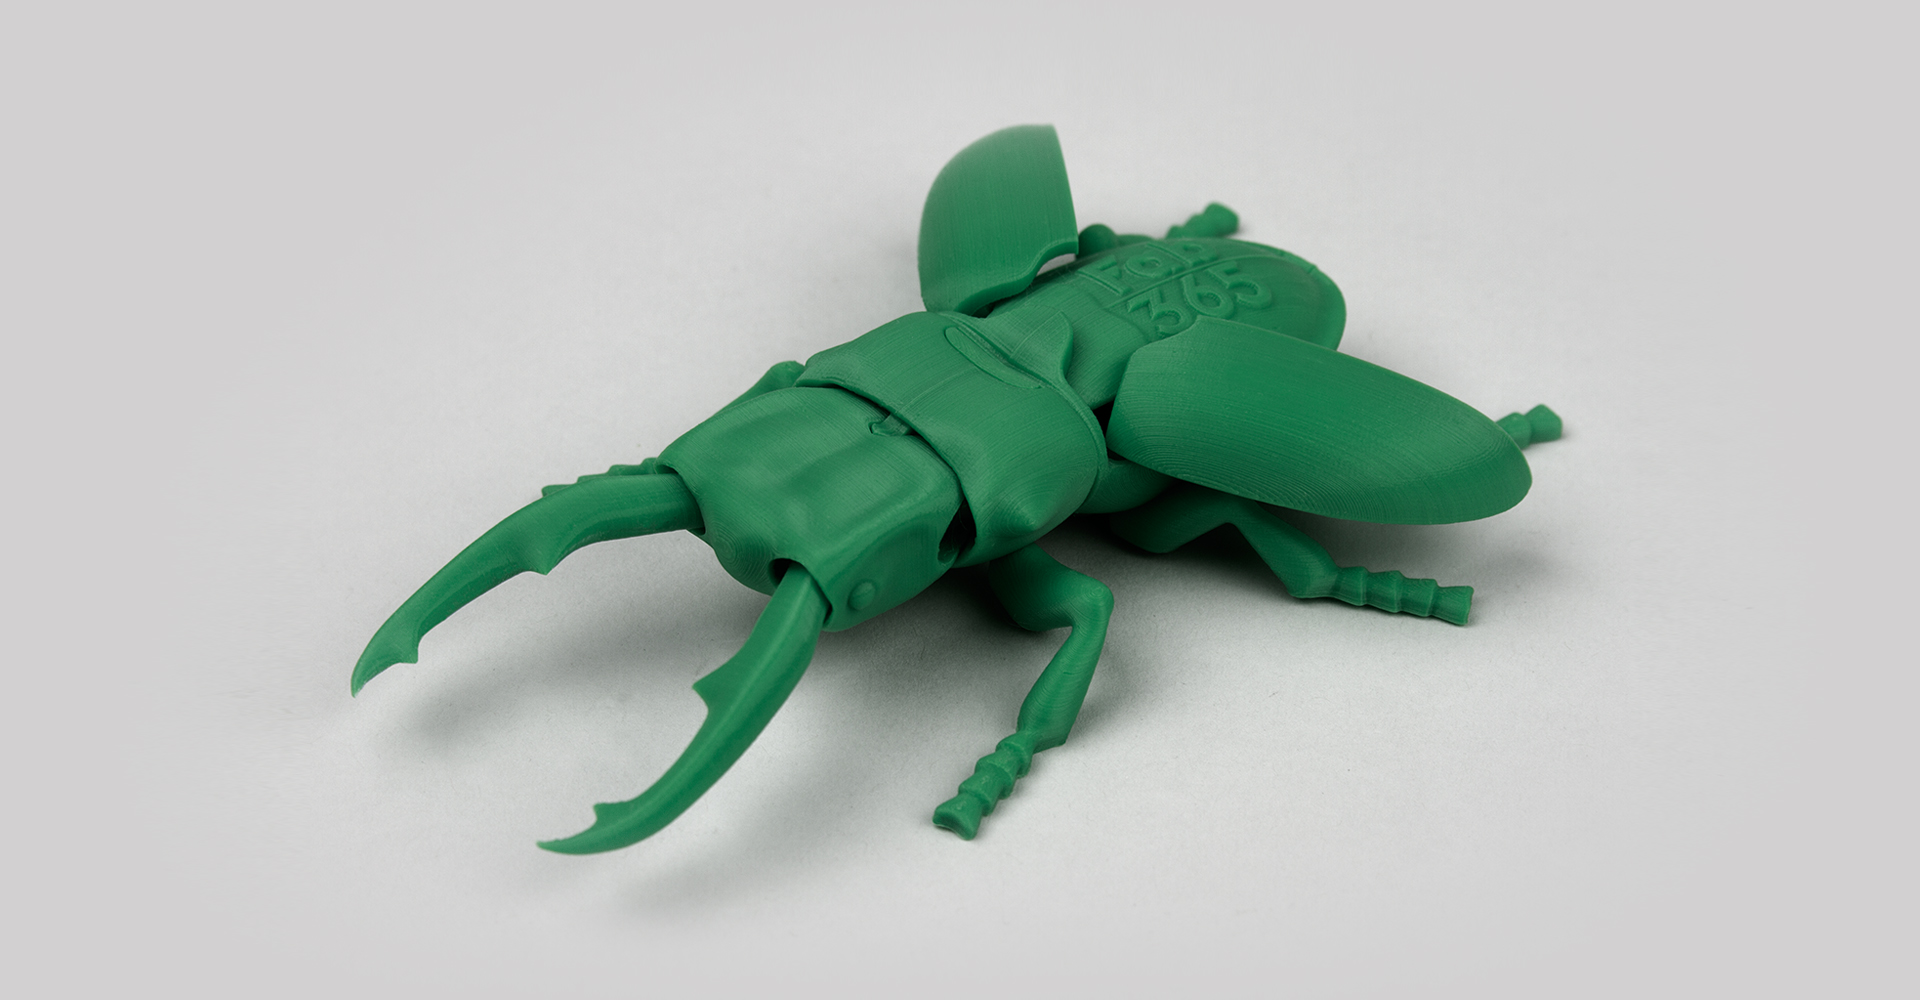 Foldable stag beetle gcode by FAB365 - MK2/S, MK2.5/S, MK3/S